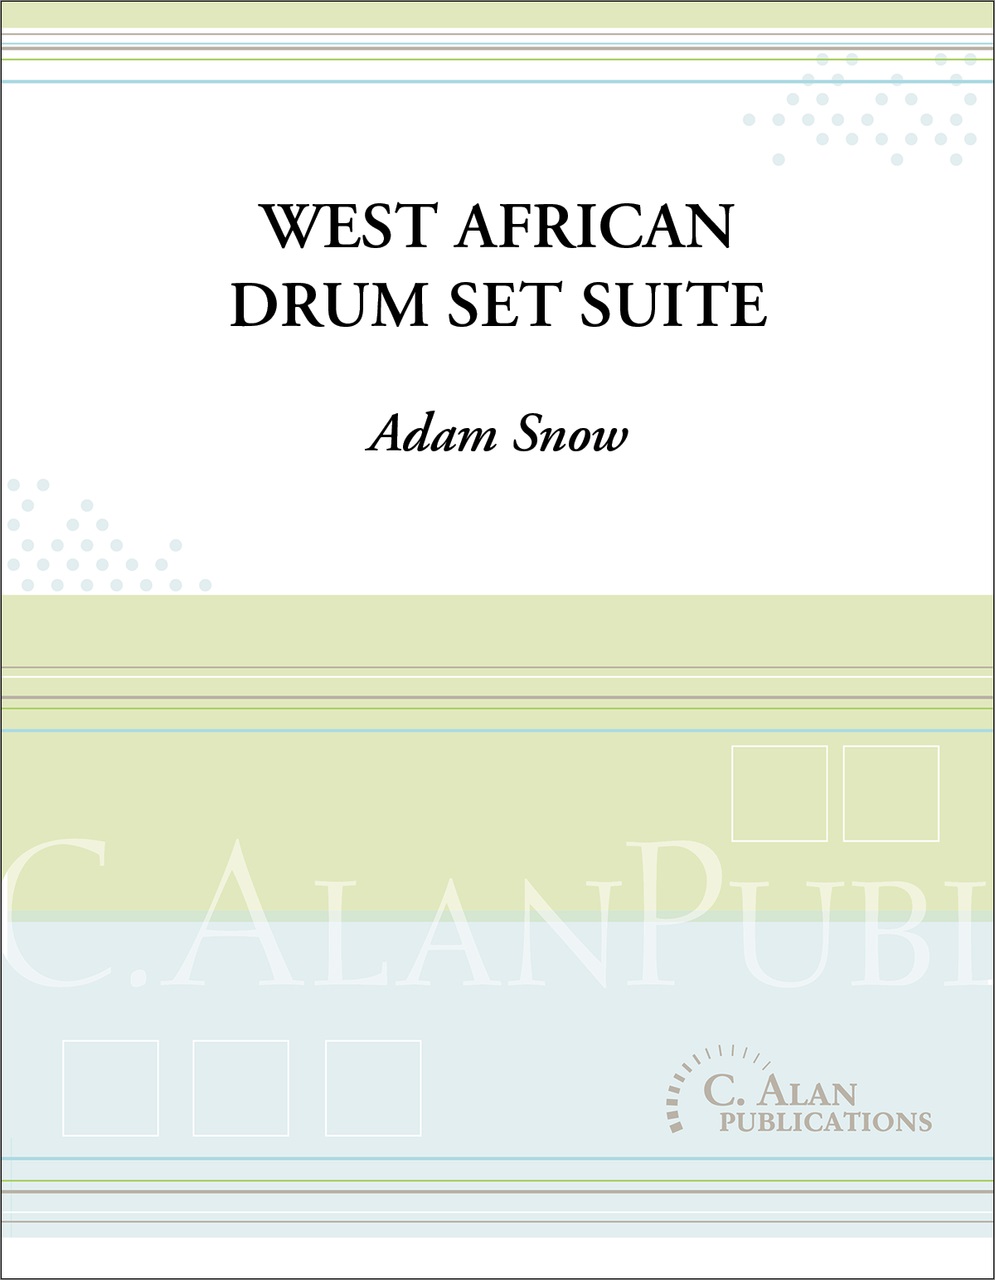 West African Drum Set Suite percussion sheet music cover